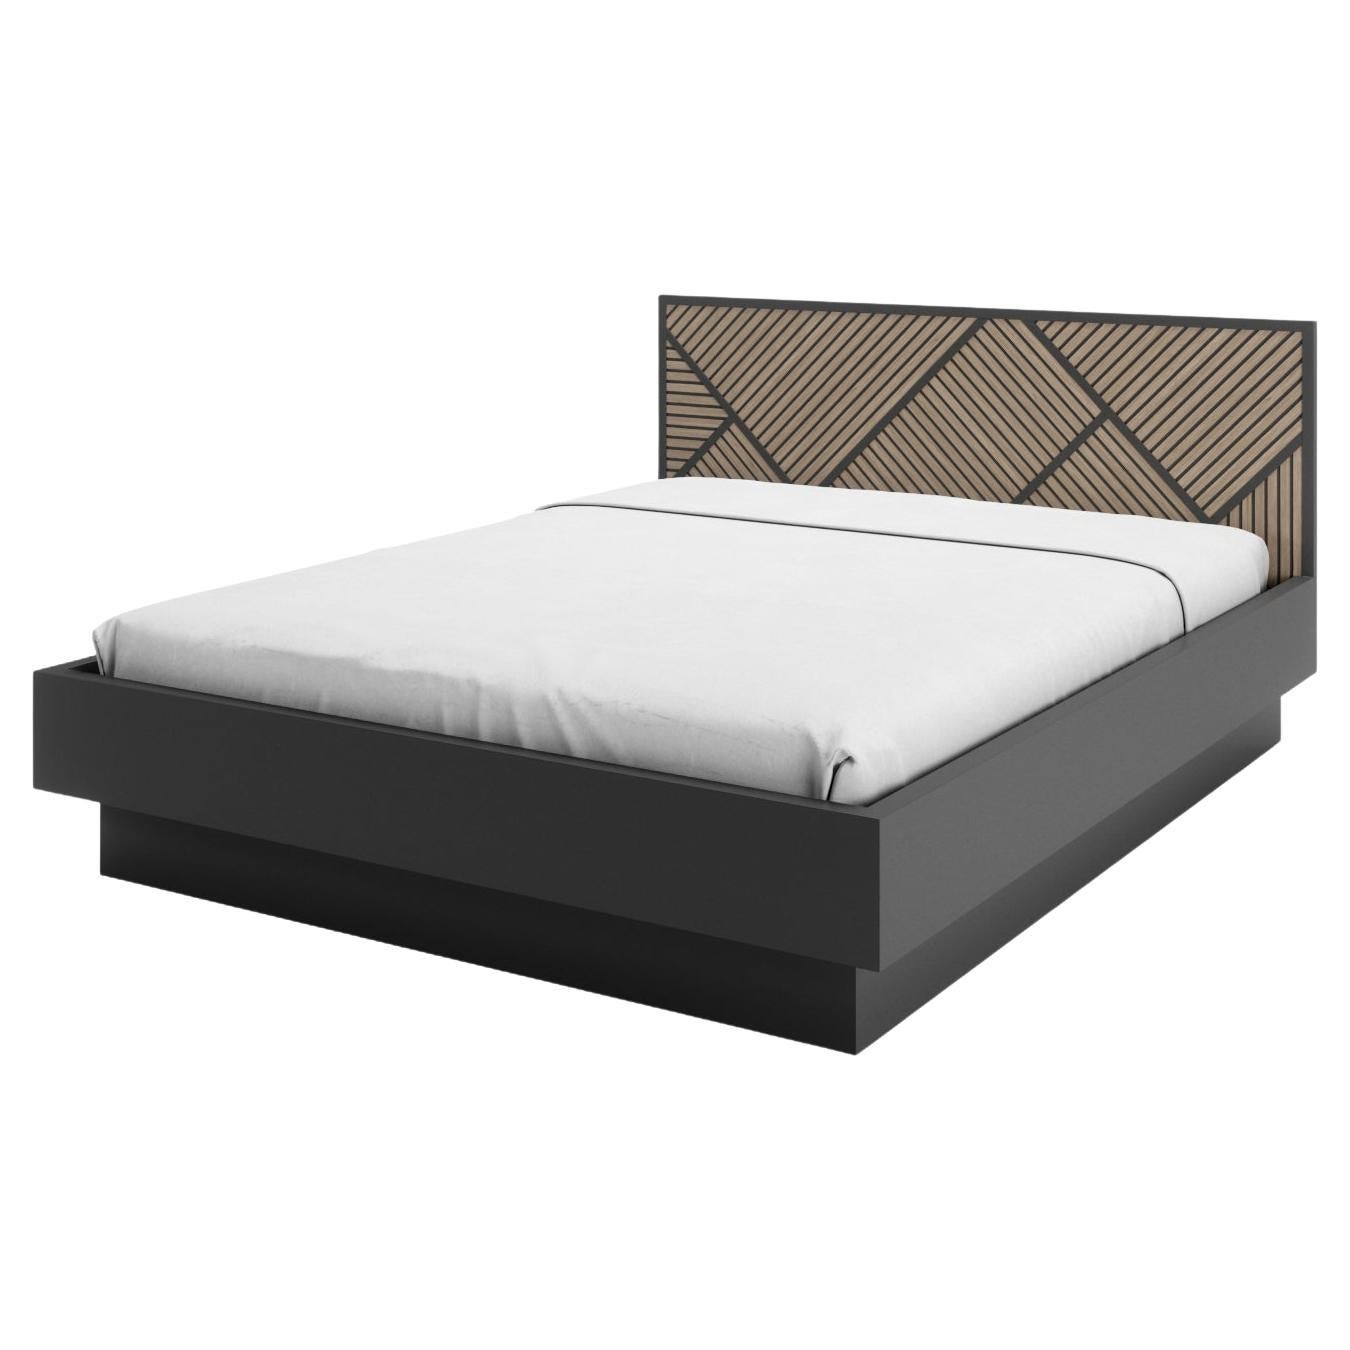 Slide Bed with Storage for Mattress For Sale